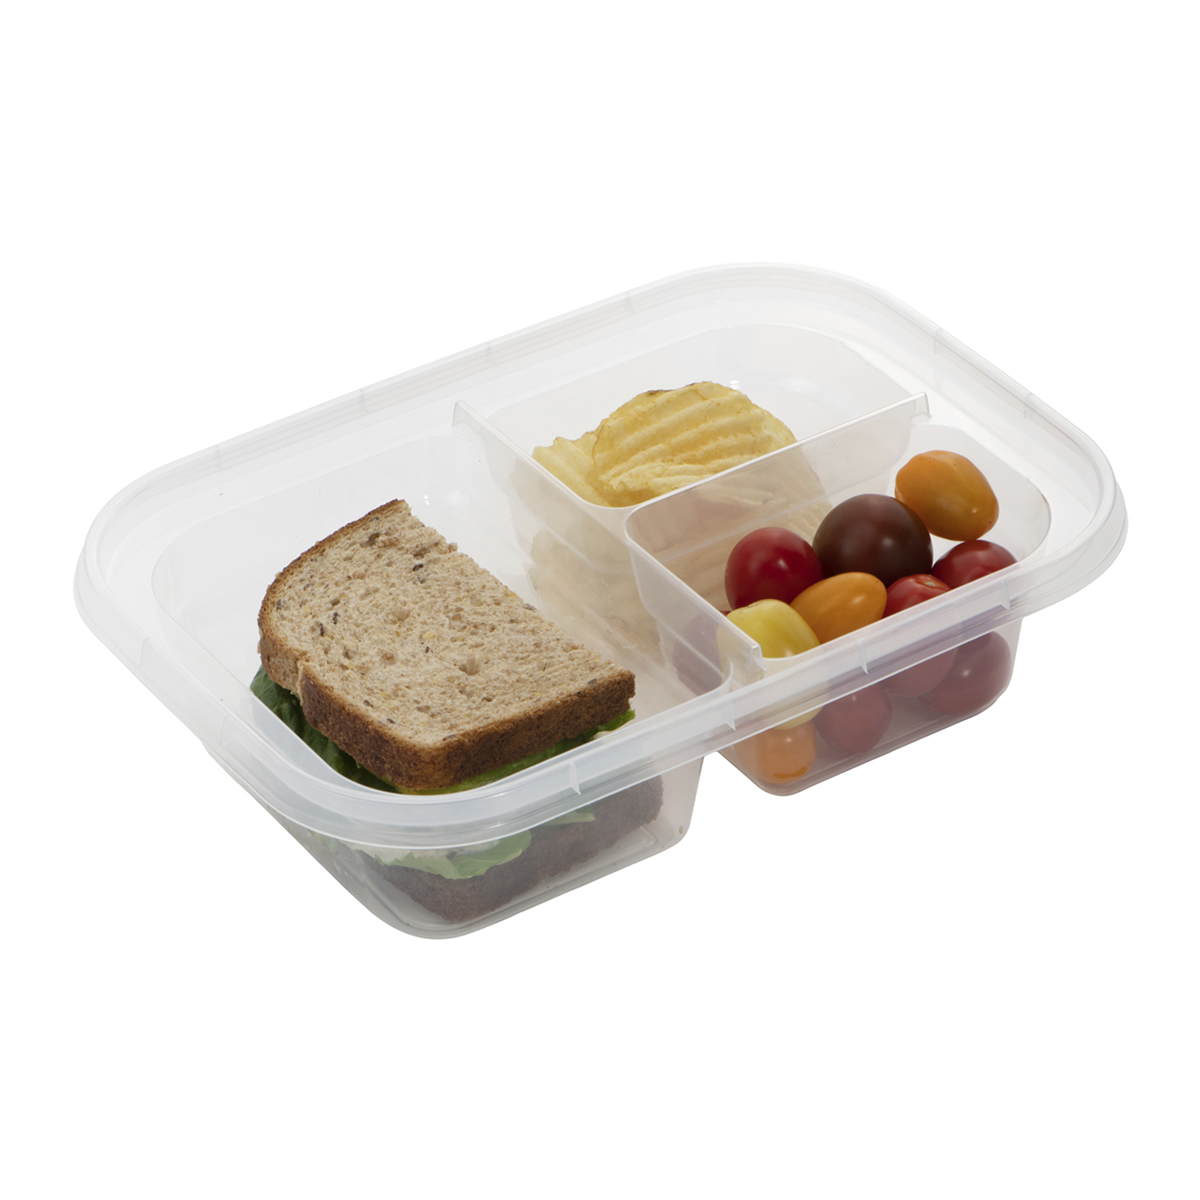 Large Bento Box Lunch Containers Adult Kids Toddler Lunchable